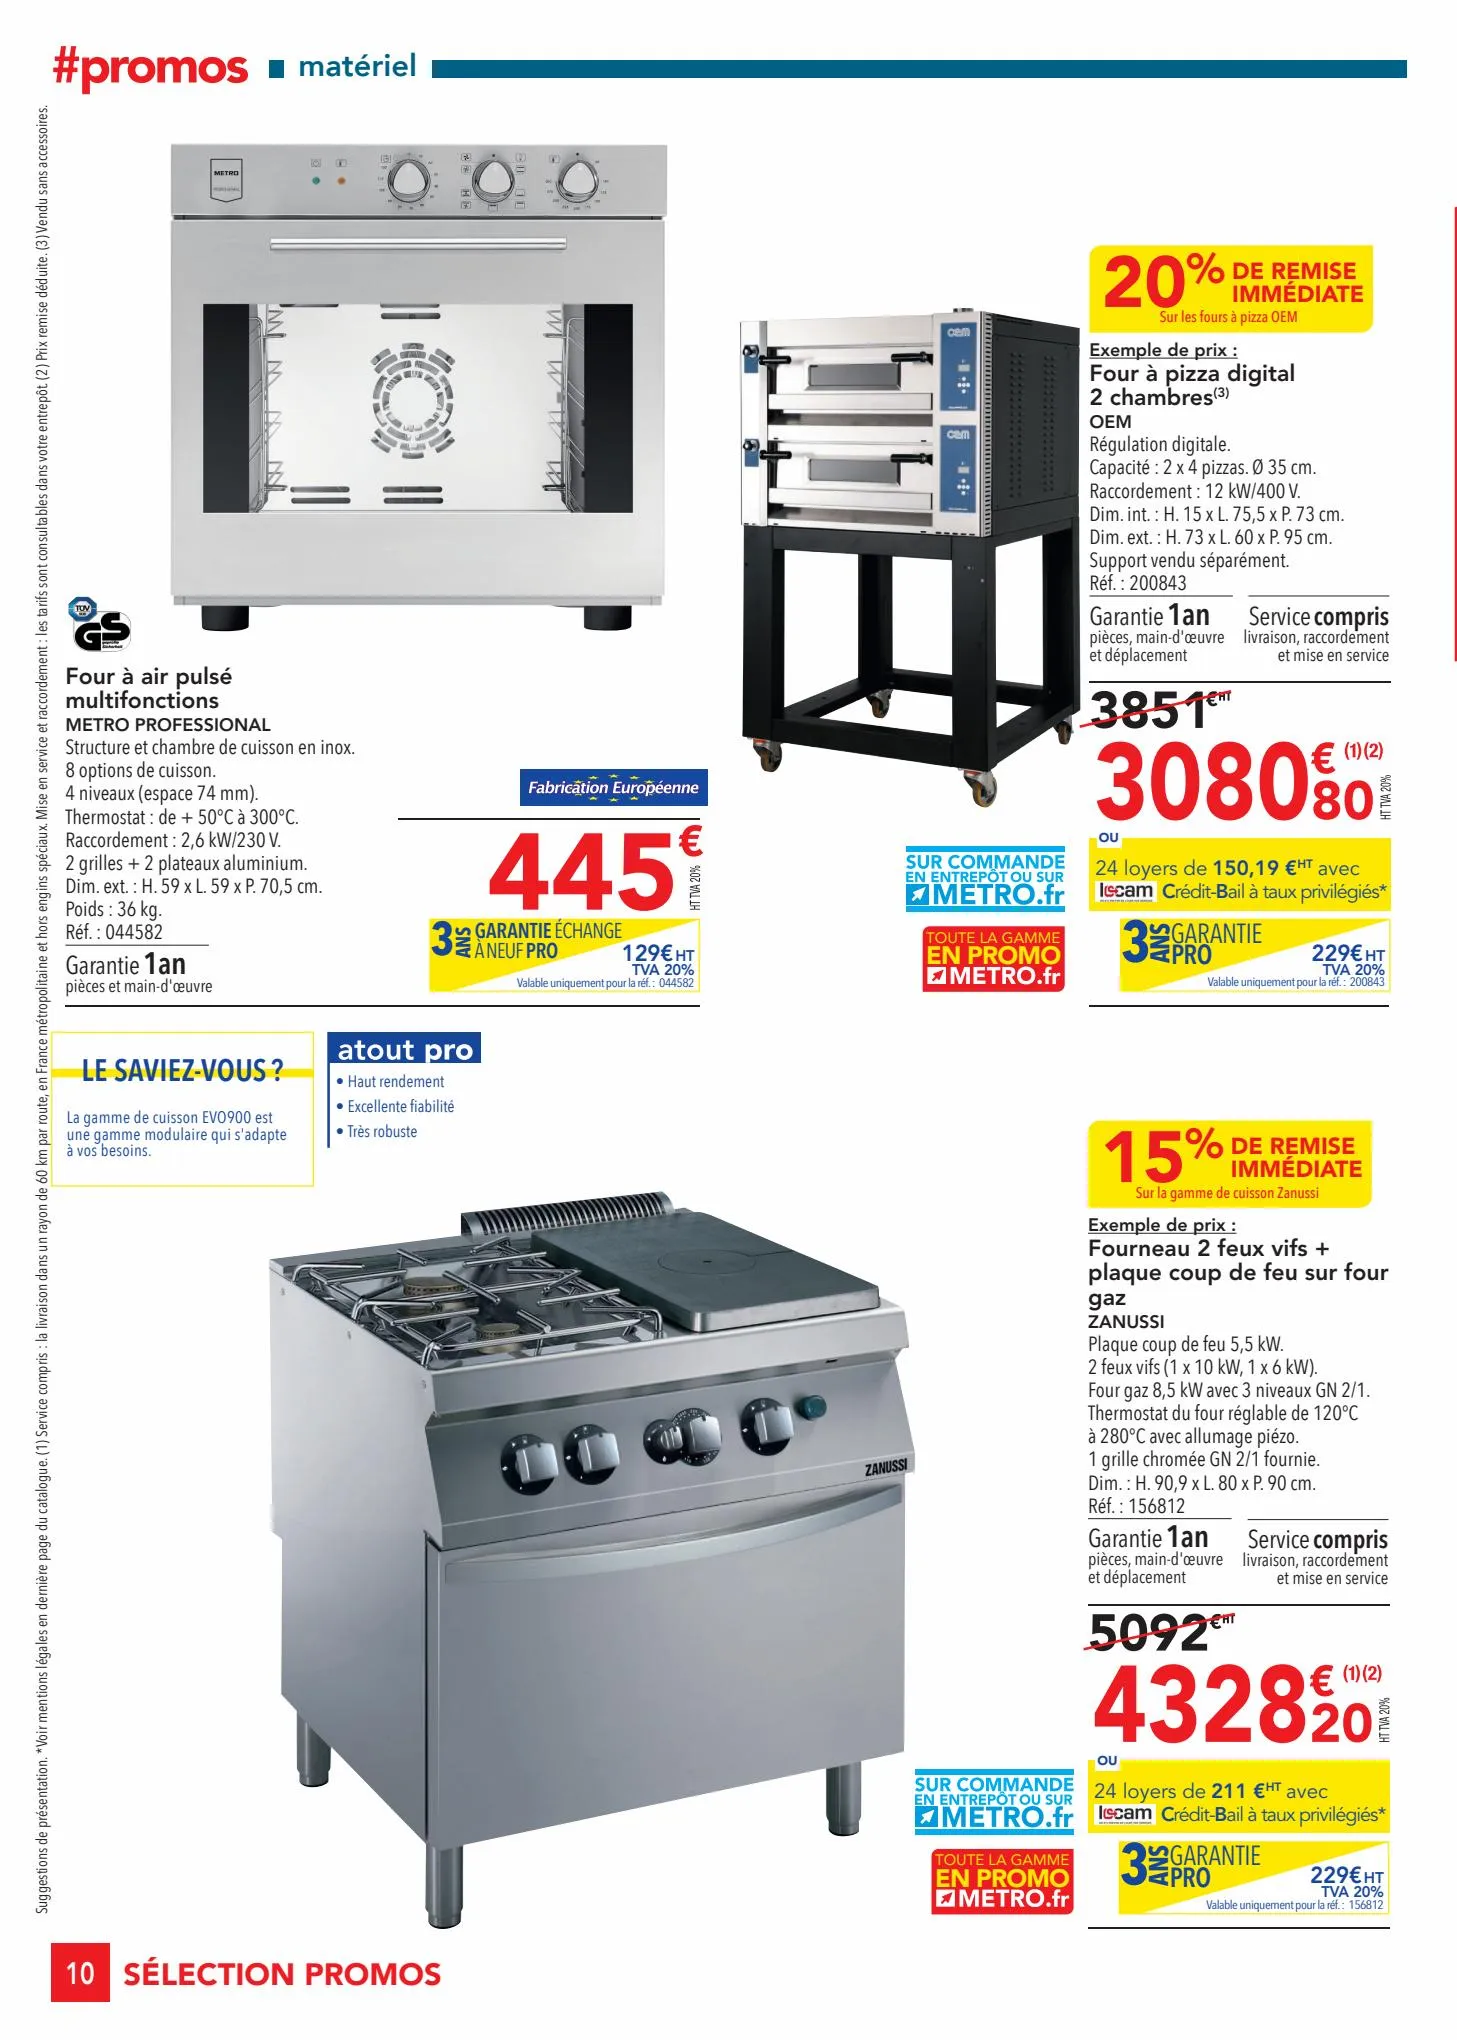 Catalogue Selection Promos Equipement, page 00010